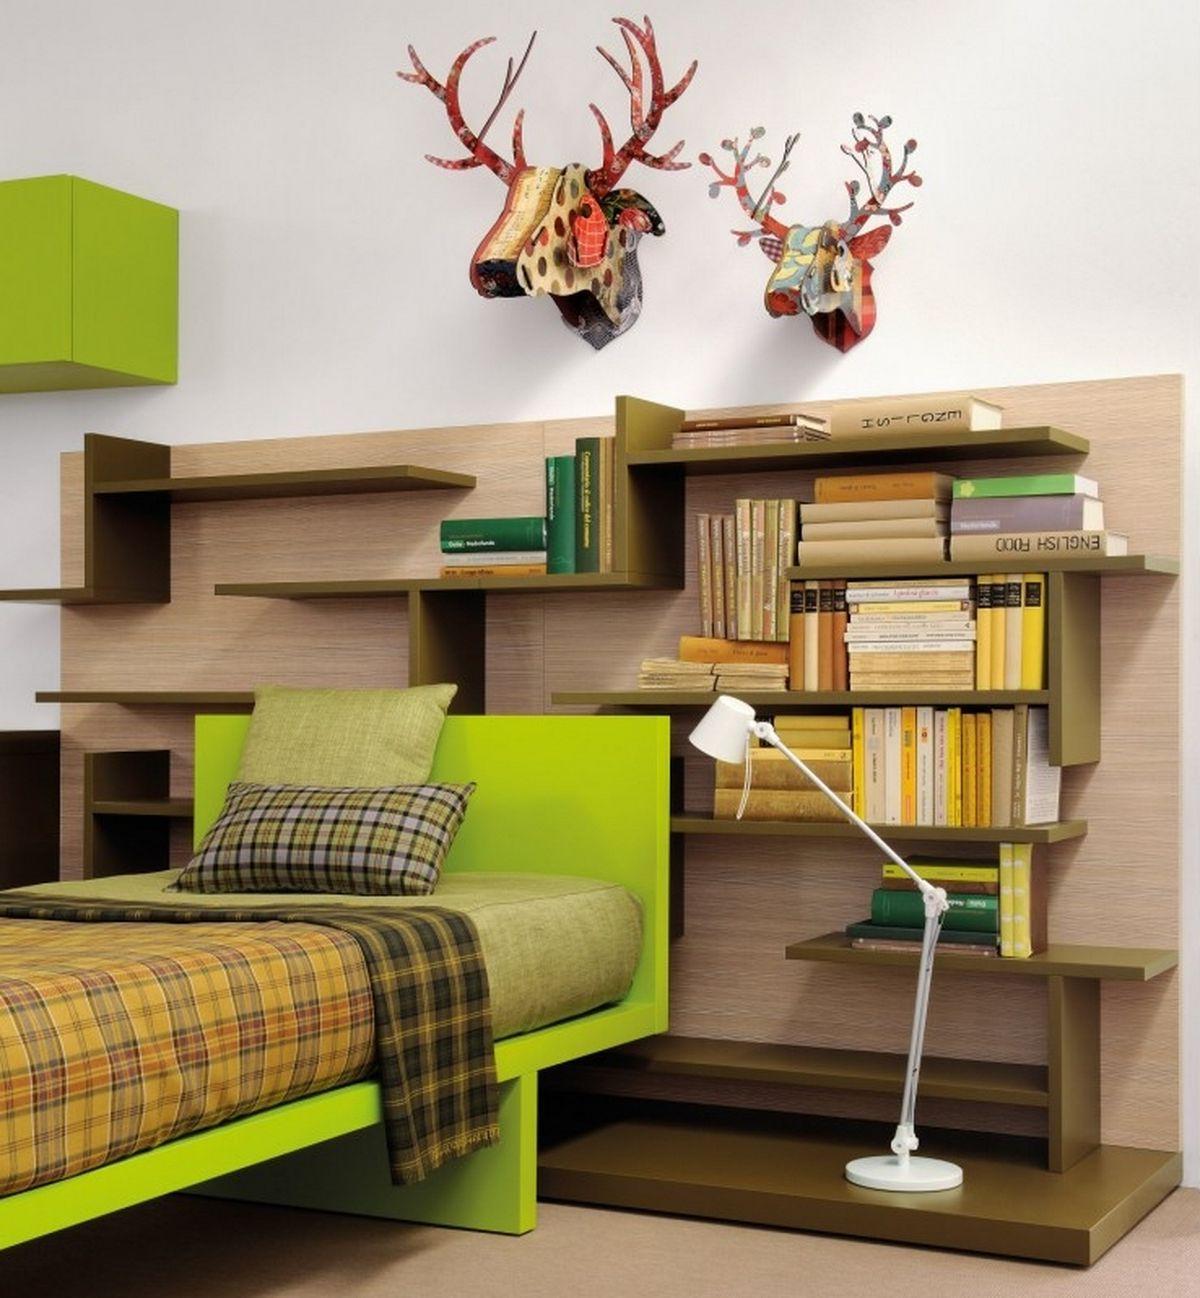 Design For Ideas Mesmerizing Design For Bookshelf Decorating Ideas With Oak Material Beside Green Single Bed Decoration Bookshelf Decorating Ideas Complementing Your Minimalist Seating Room